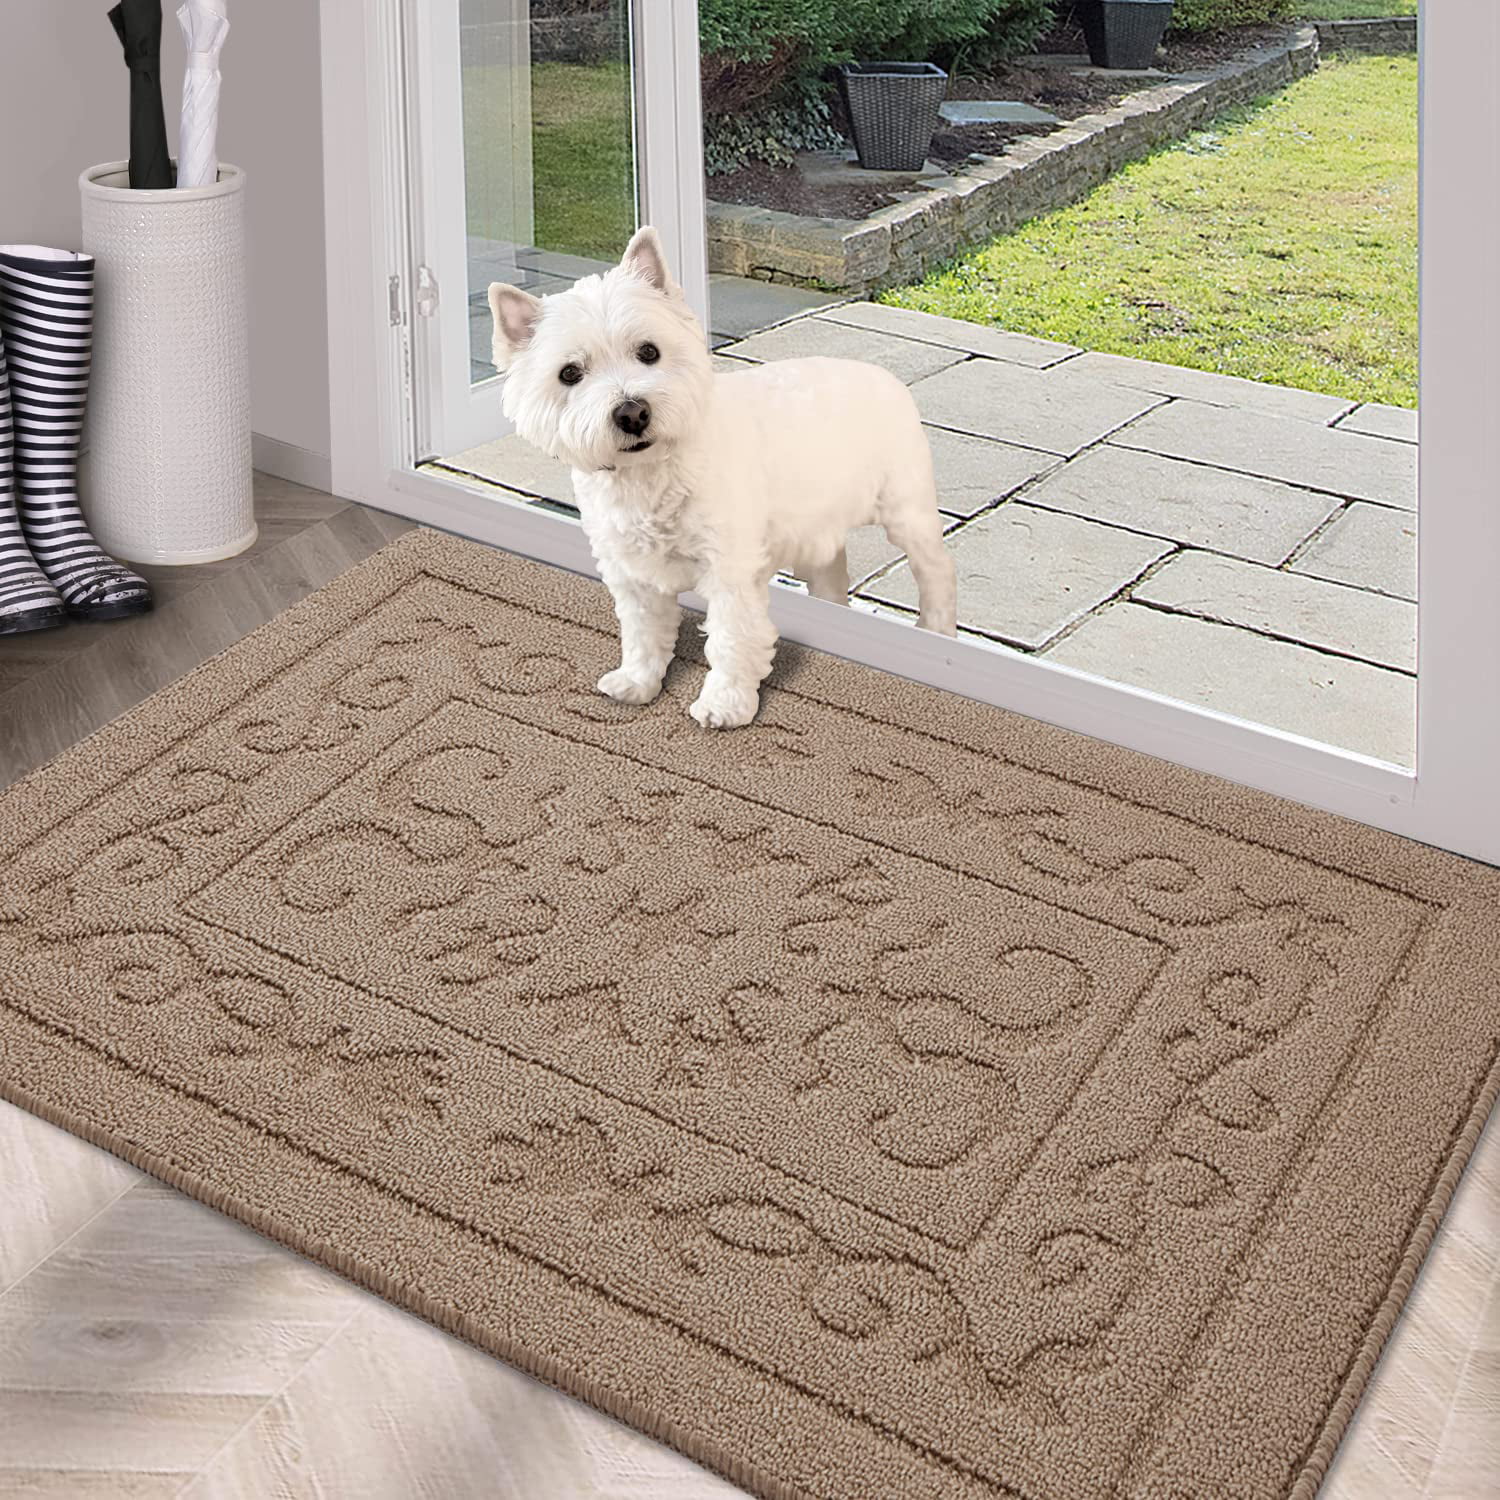 Family Name Entry Rug Personalized Entryway Rug Entrance Rug for Inside  House Indoor Welcome Mat No Pile Non Slip Machine Washable AR212-09 